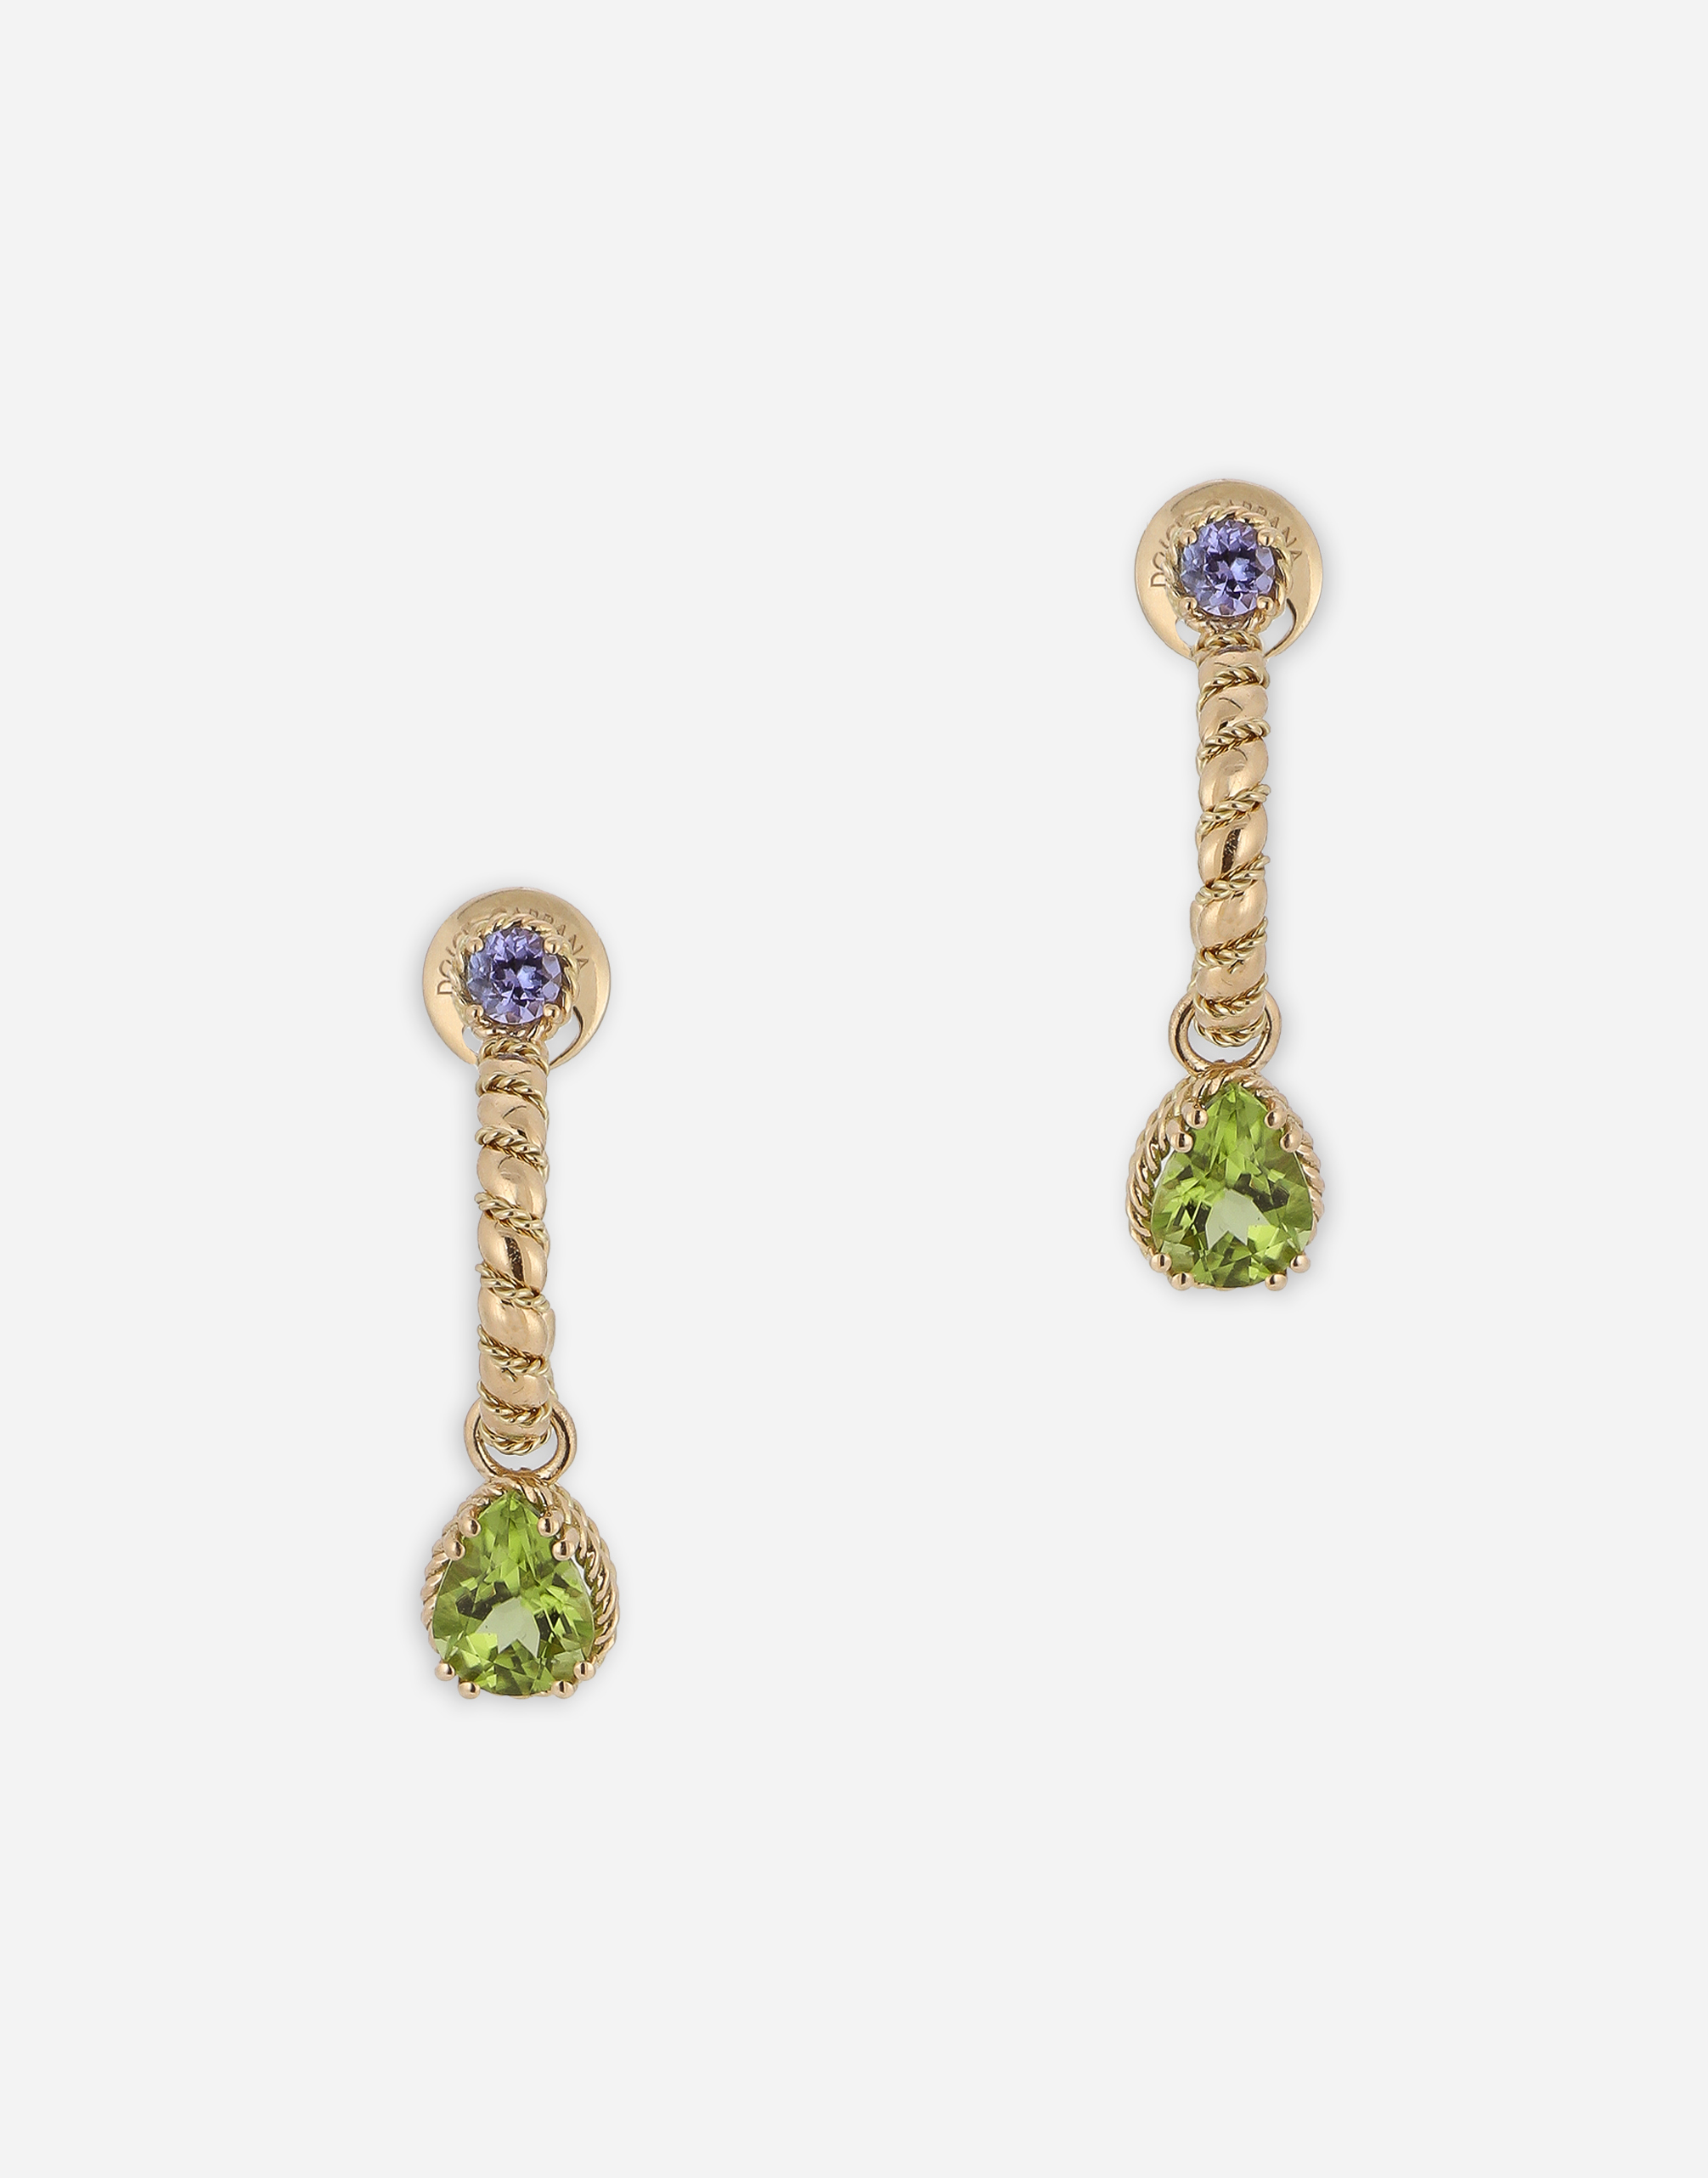 Dolce & Gabbana 18 Kt Yellow Gold Earrings With Multicolor Fine Gemstones